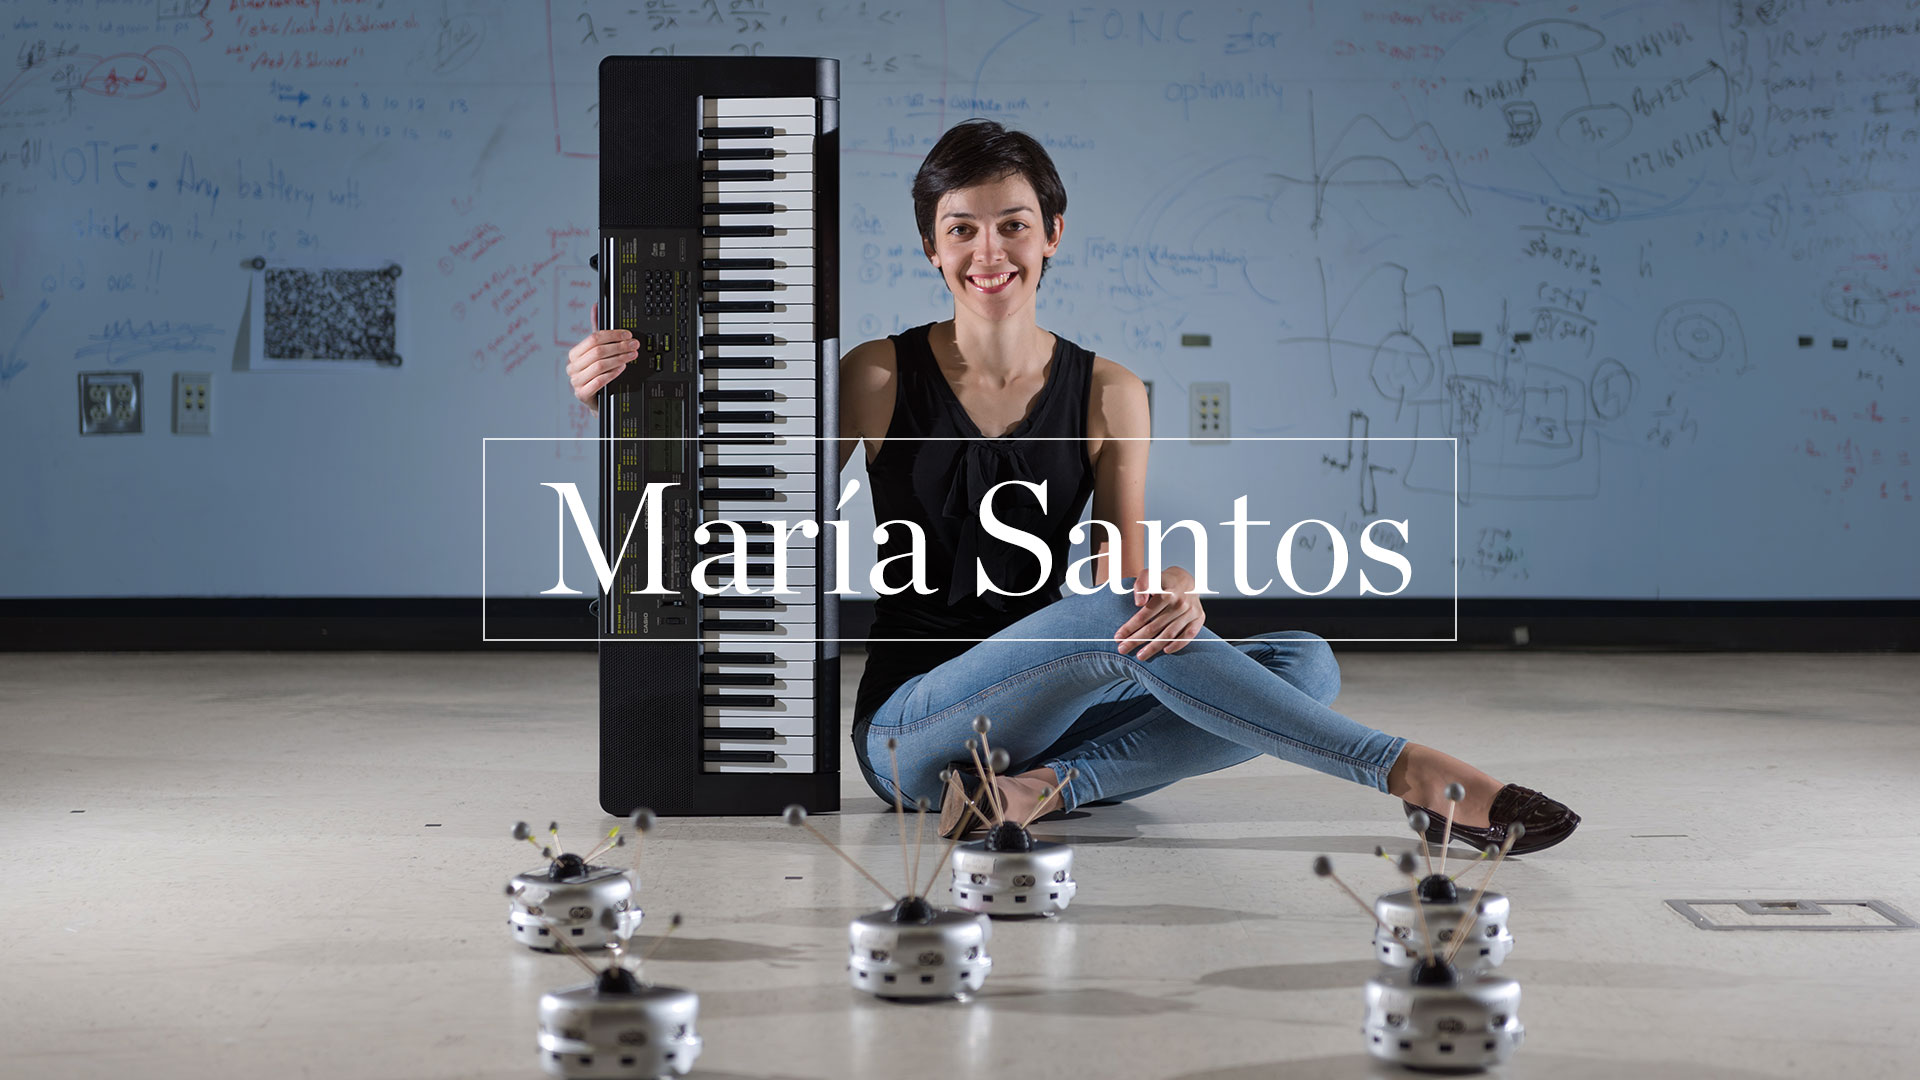 photo -  Maria Santos sitting on floor of computer lab, holding keyboard, with six tiny puck shaped robots on the floor in front of her